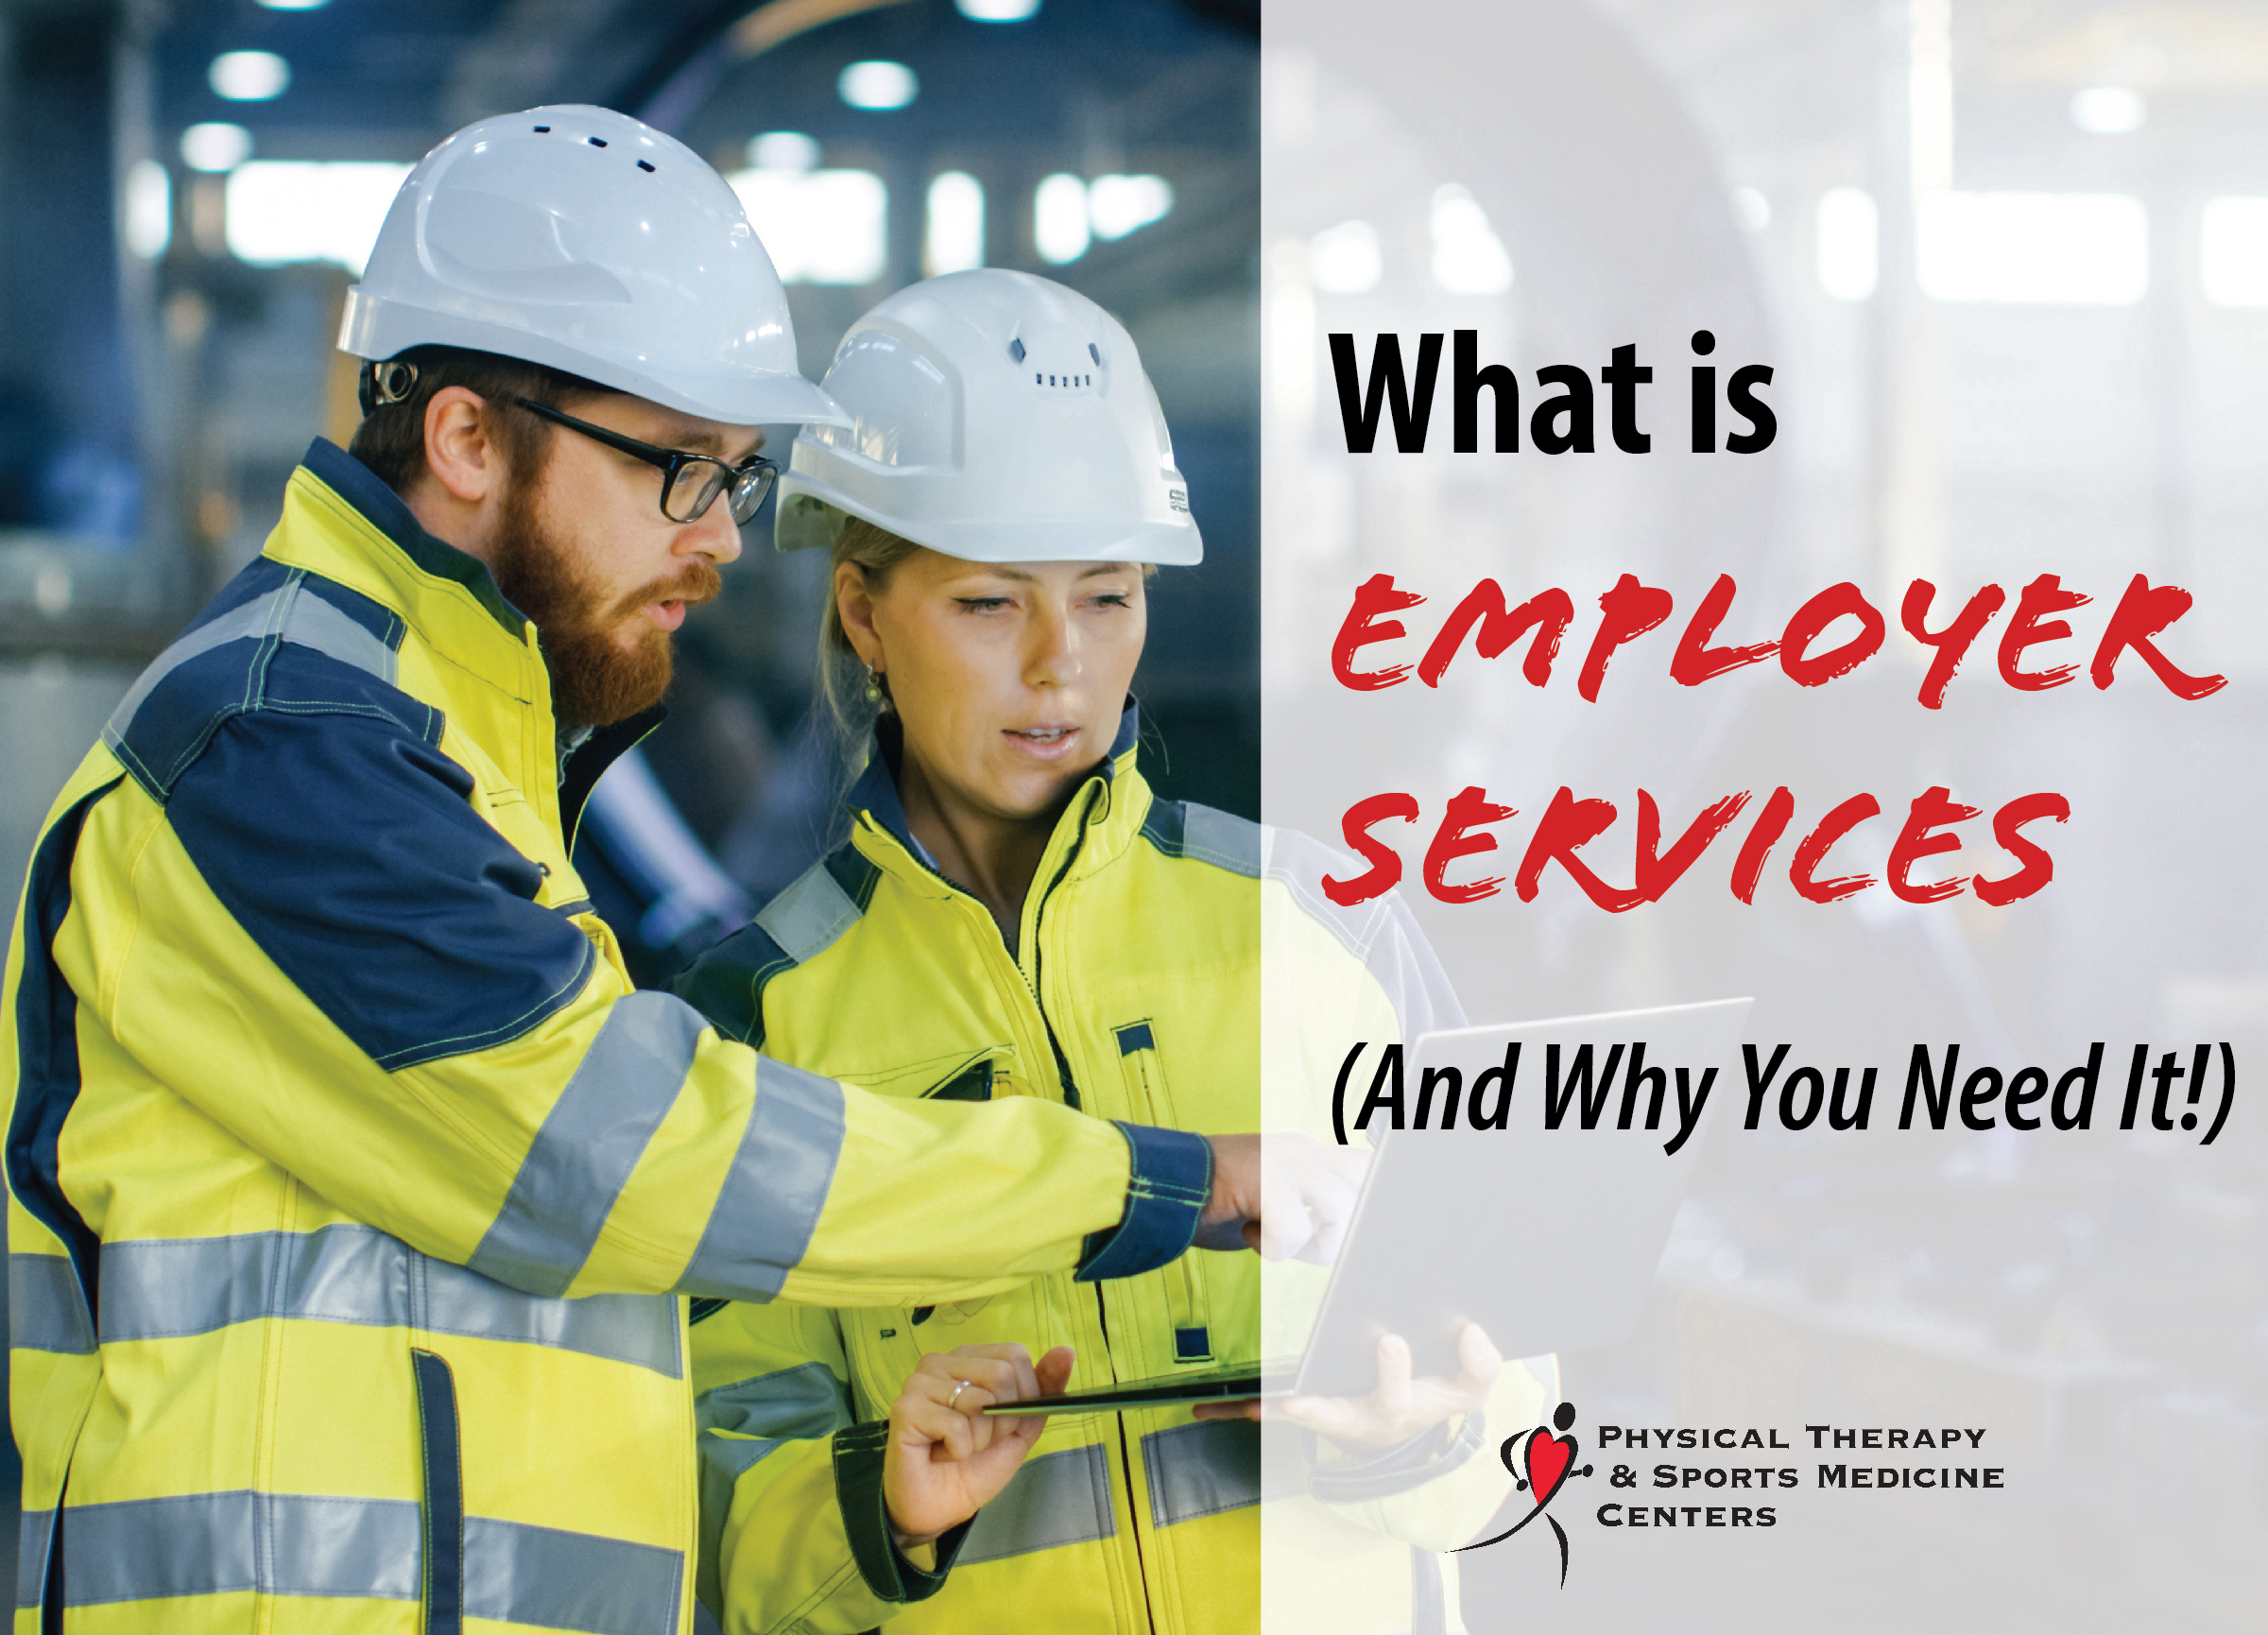 Graphic with industrial workers and text: What is Employer Services (And Why You Need It).